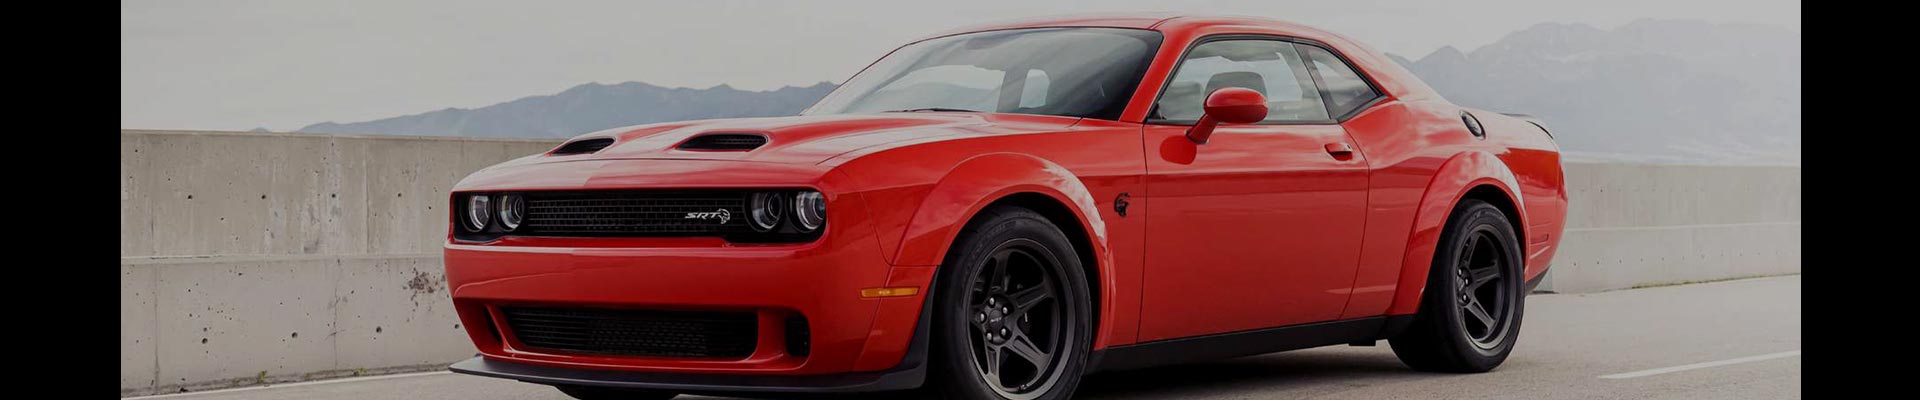 Shop Replacement and OEM 2019 Dodge Challenger Parts with Discounted Price on the Net